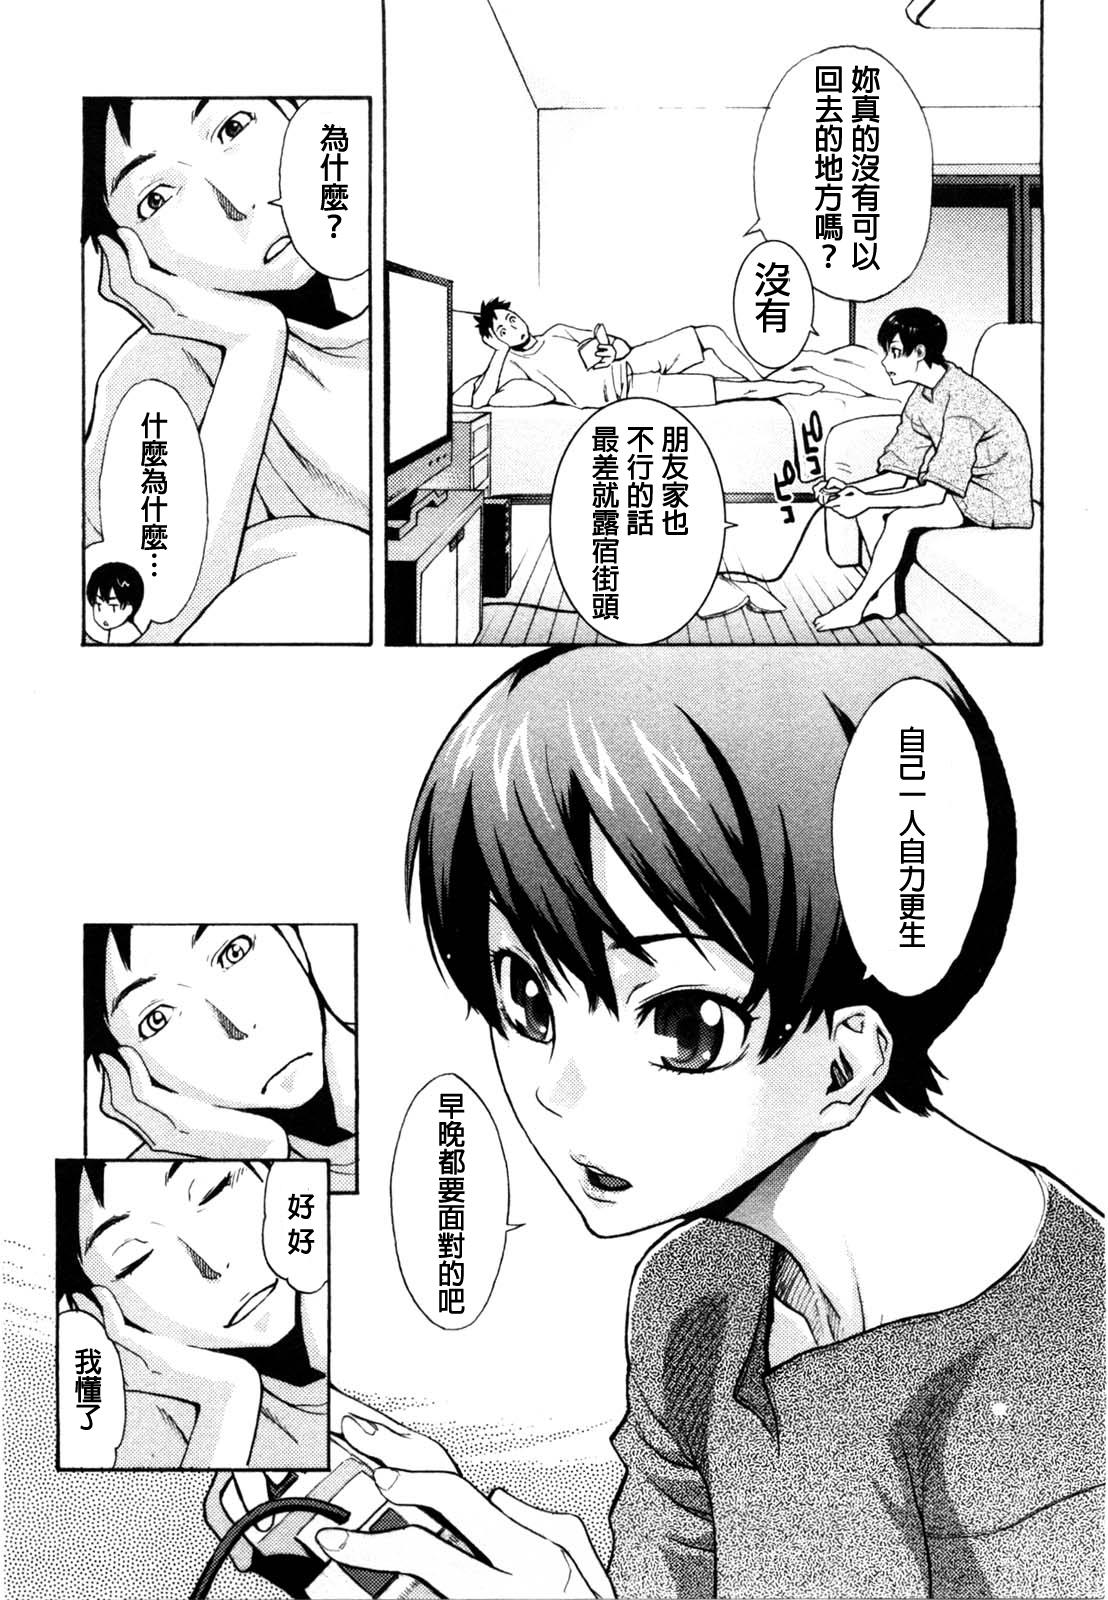 Old Vs Young Sanchoume no Tama | Tama from Third Street Ch. 1 Blacksonboys - Page 10